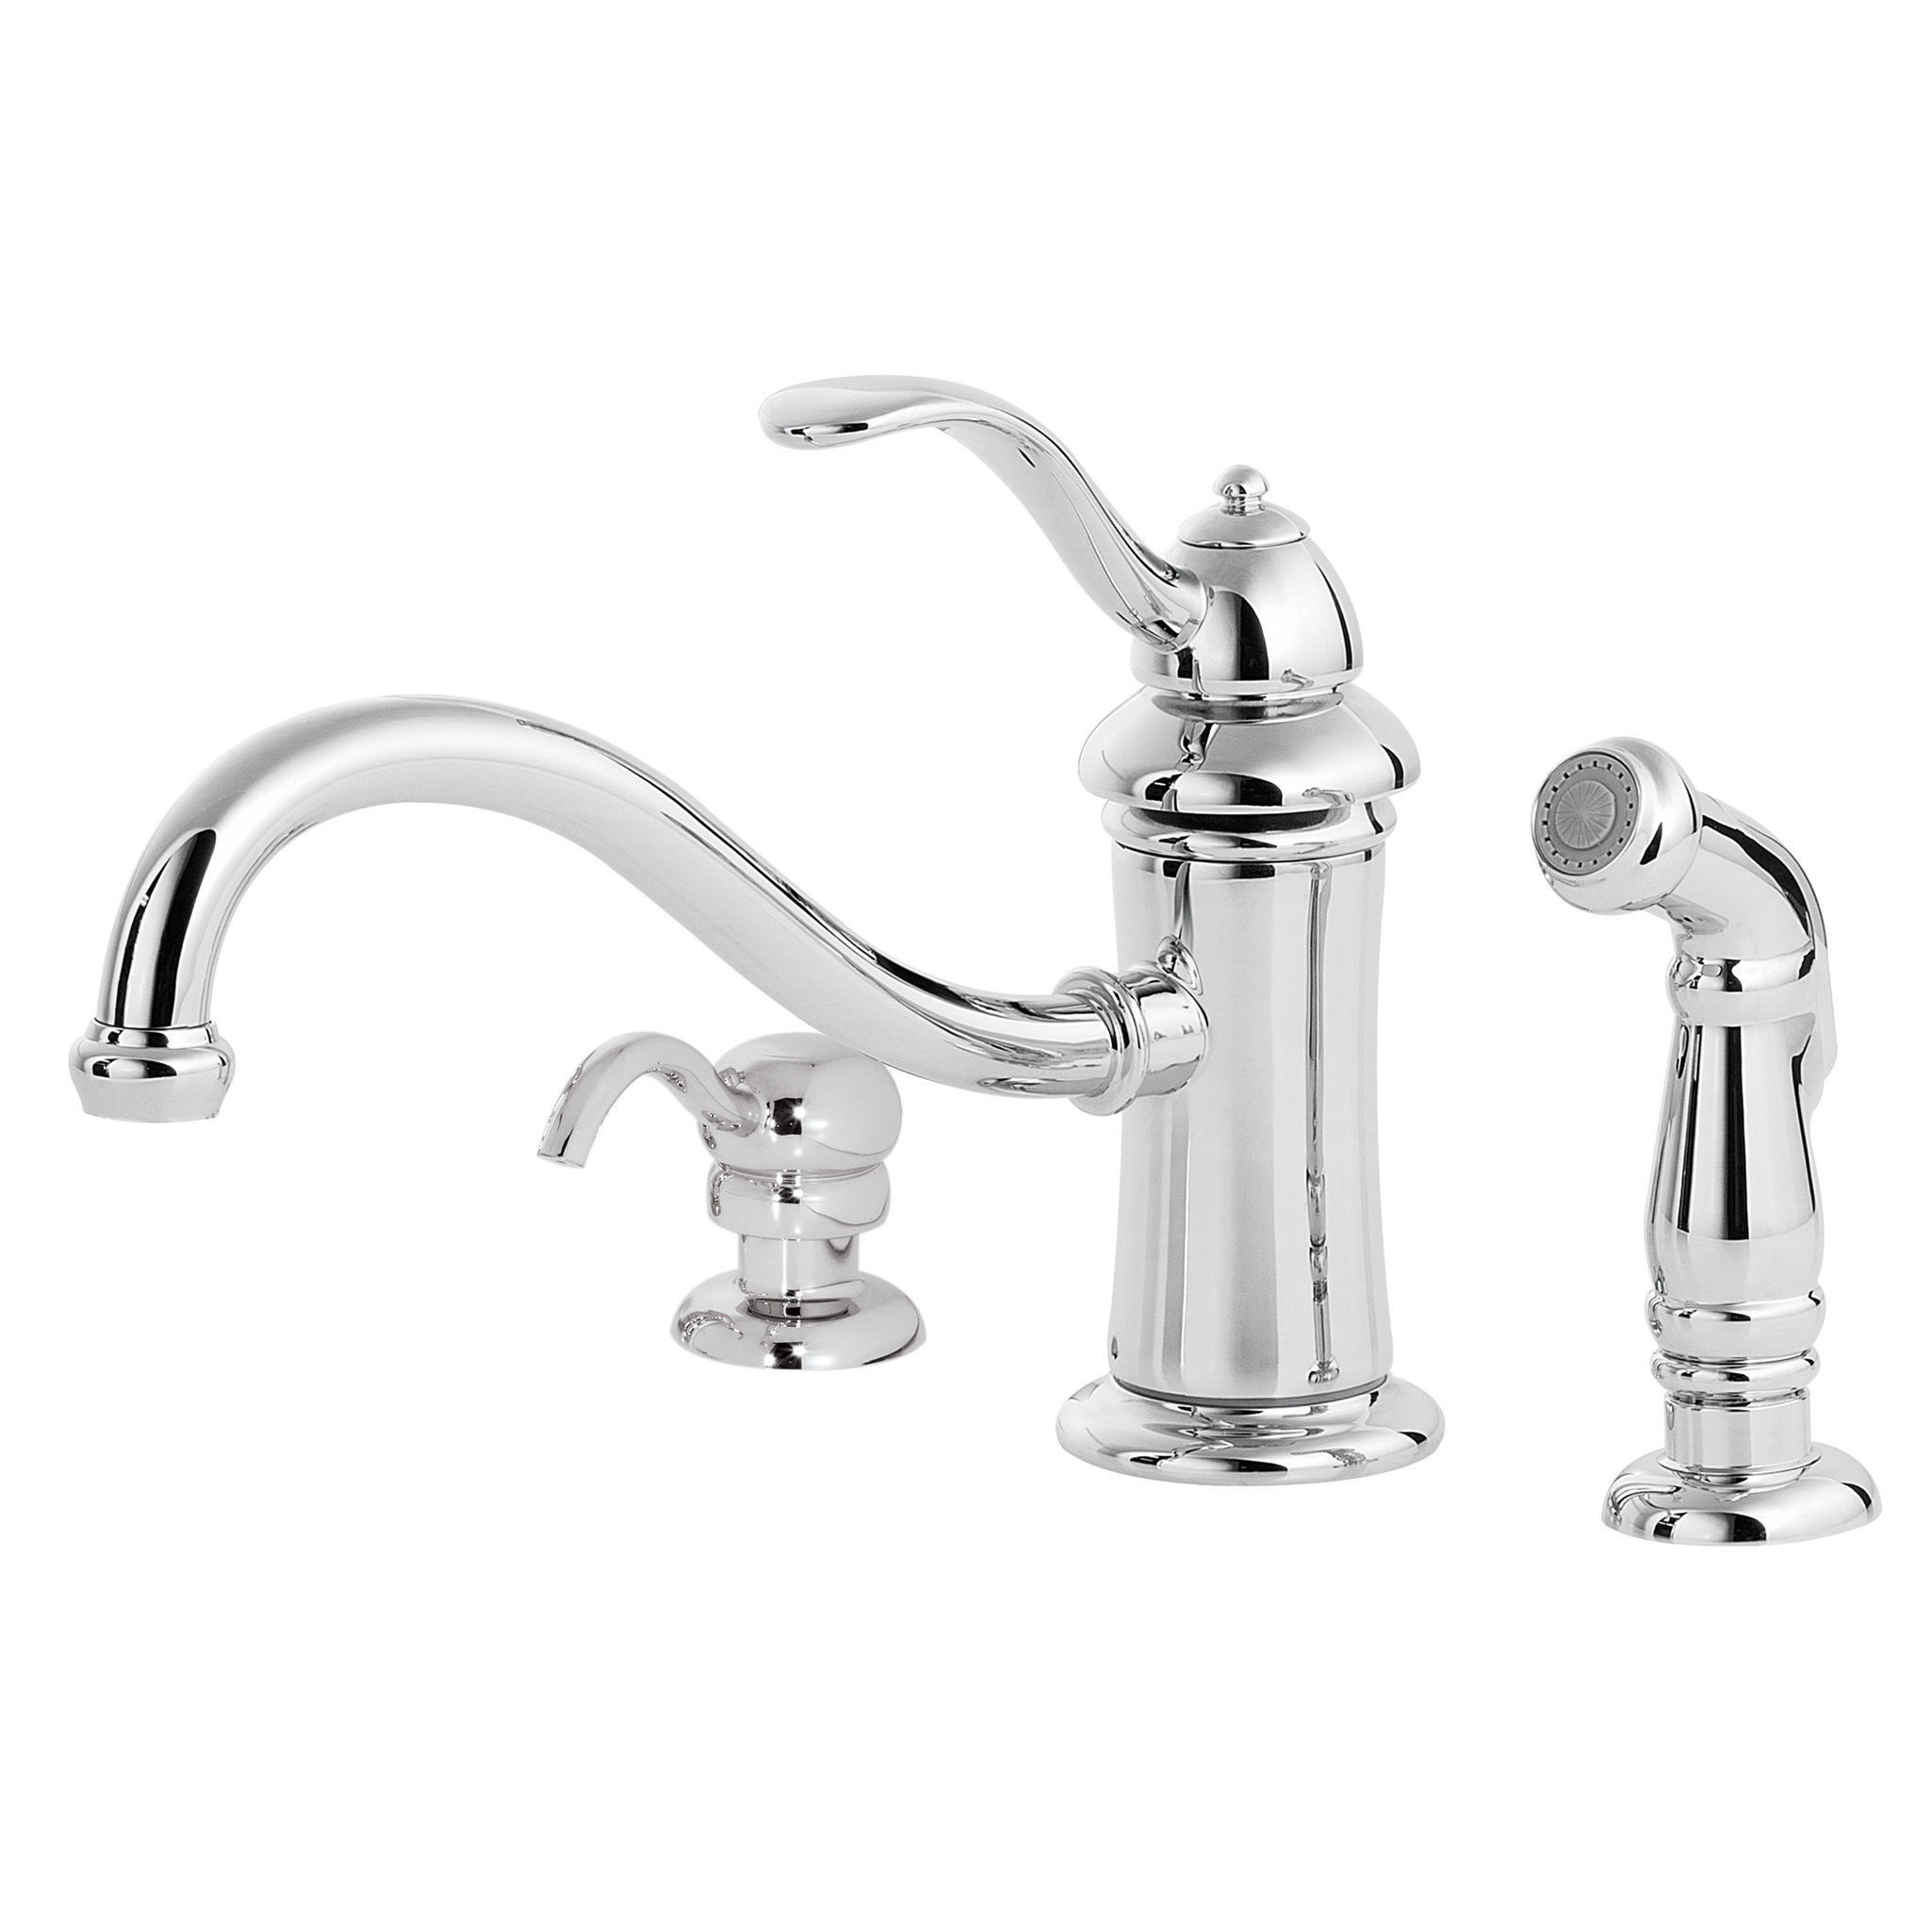 Pfister Gt34 Ptcc Polished Chrome Marielle Kitchen Faucet With